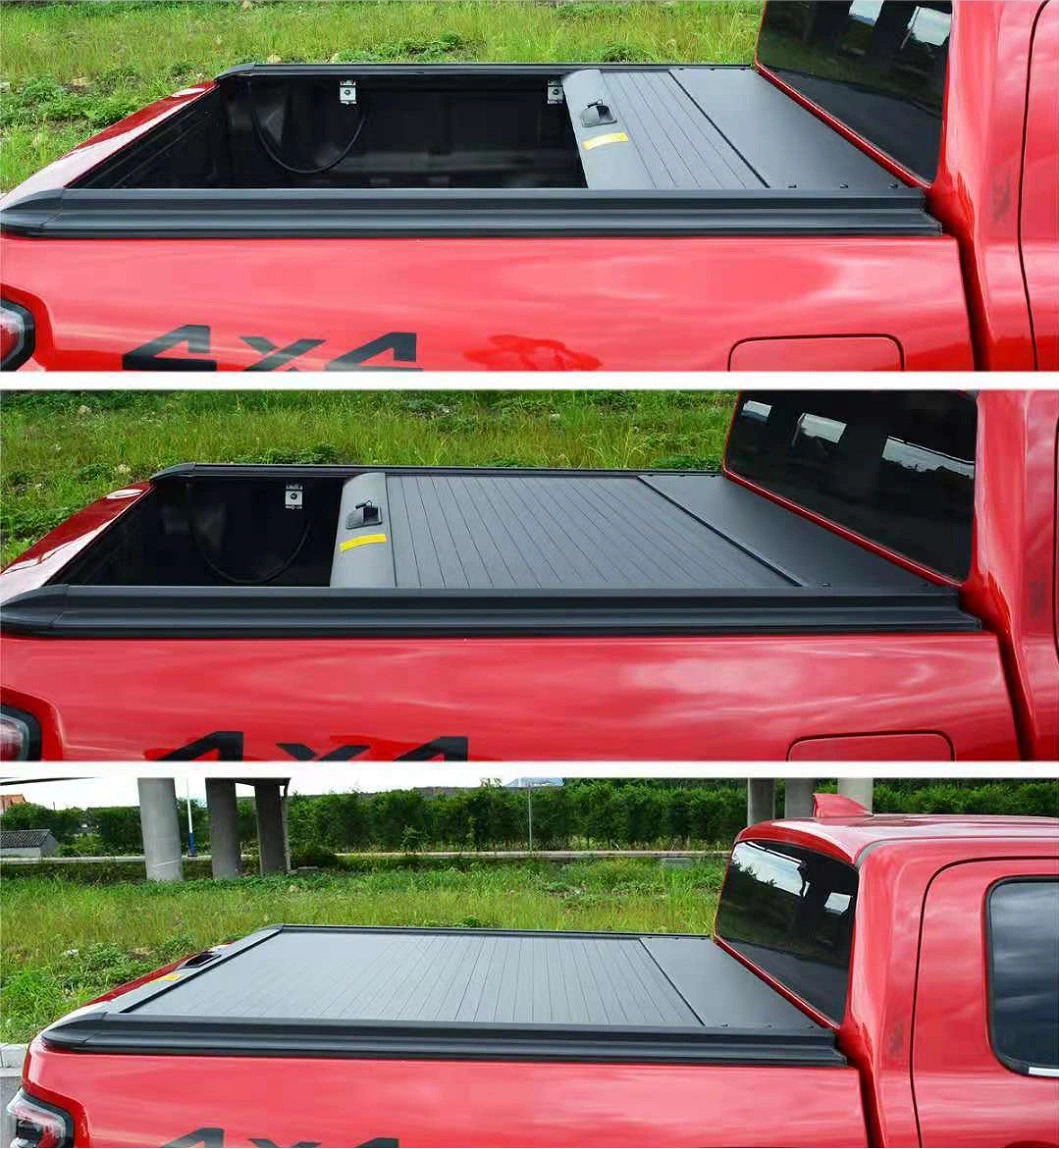 Auto Parts 4X4 Truck Pickup Roll up Hard Tonneau Cover Bed Cover for Ford Ranger Dodge RAM Hilux Np300 Dmax Trtion Gmc for Toyota Isuze Mazda Nissan VW Misubish